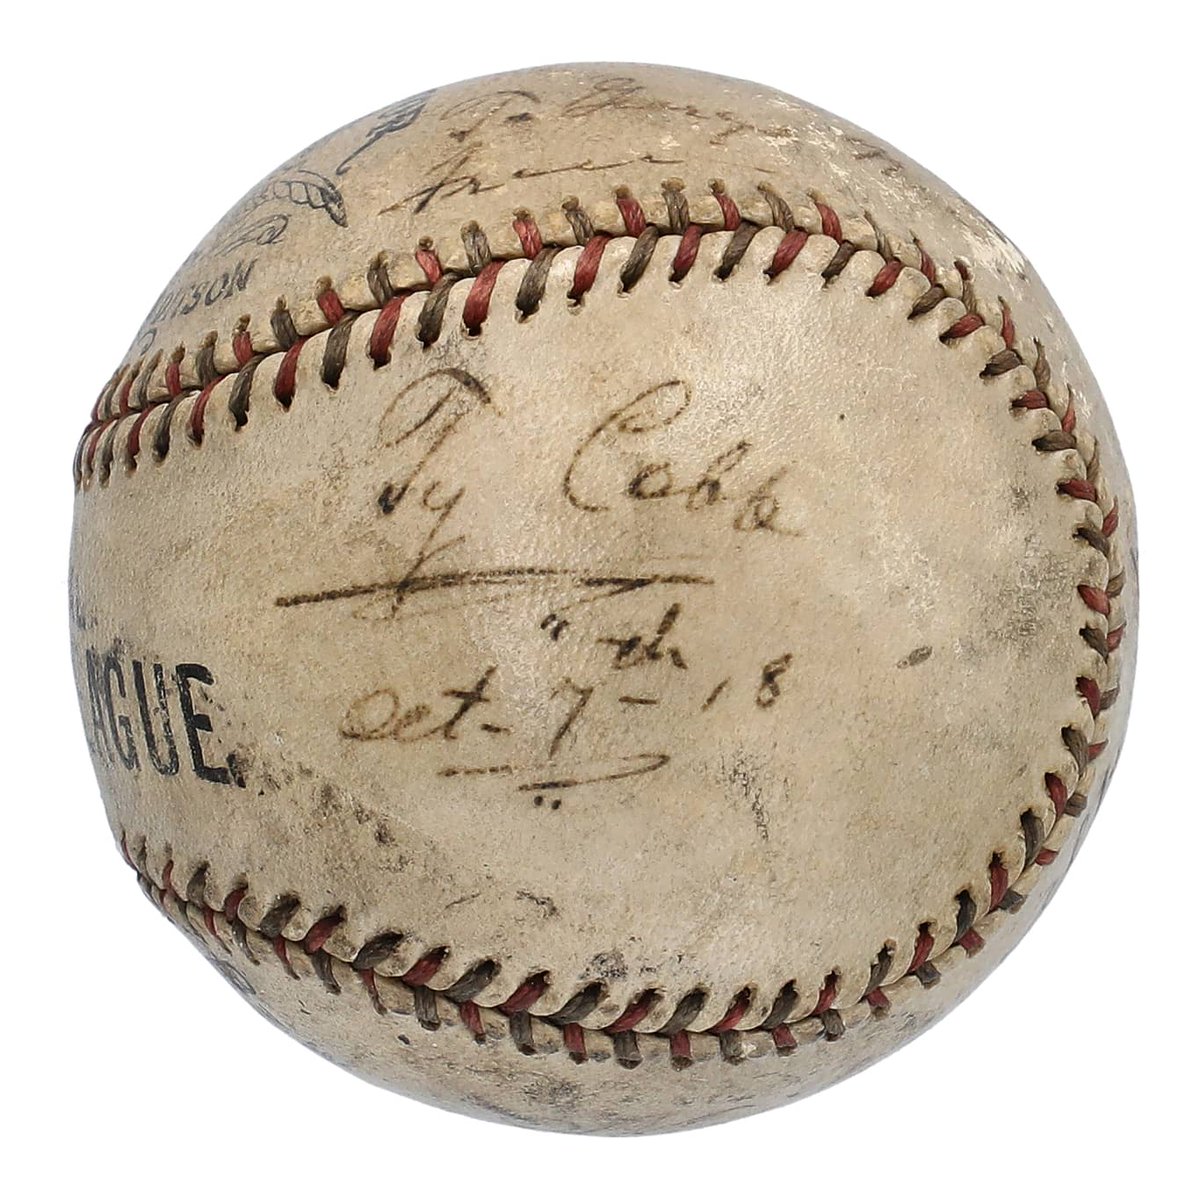 An incredible relic of baseball's past! ⚾ 

This Ty Cobb Signed, Dated 'Playing Days' Official Victor League Baseball - AL Batting Title Year - Including Rare Nicholas Altrock Signature - Beckett LOA is available now in our May Elite Auction.

Bid now: bit.ly/3wvfR2W